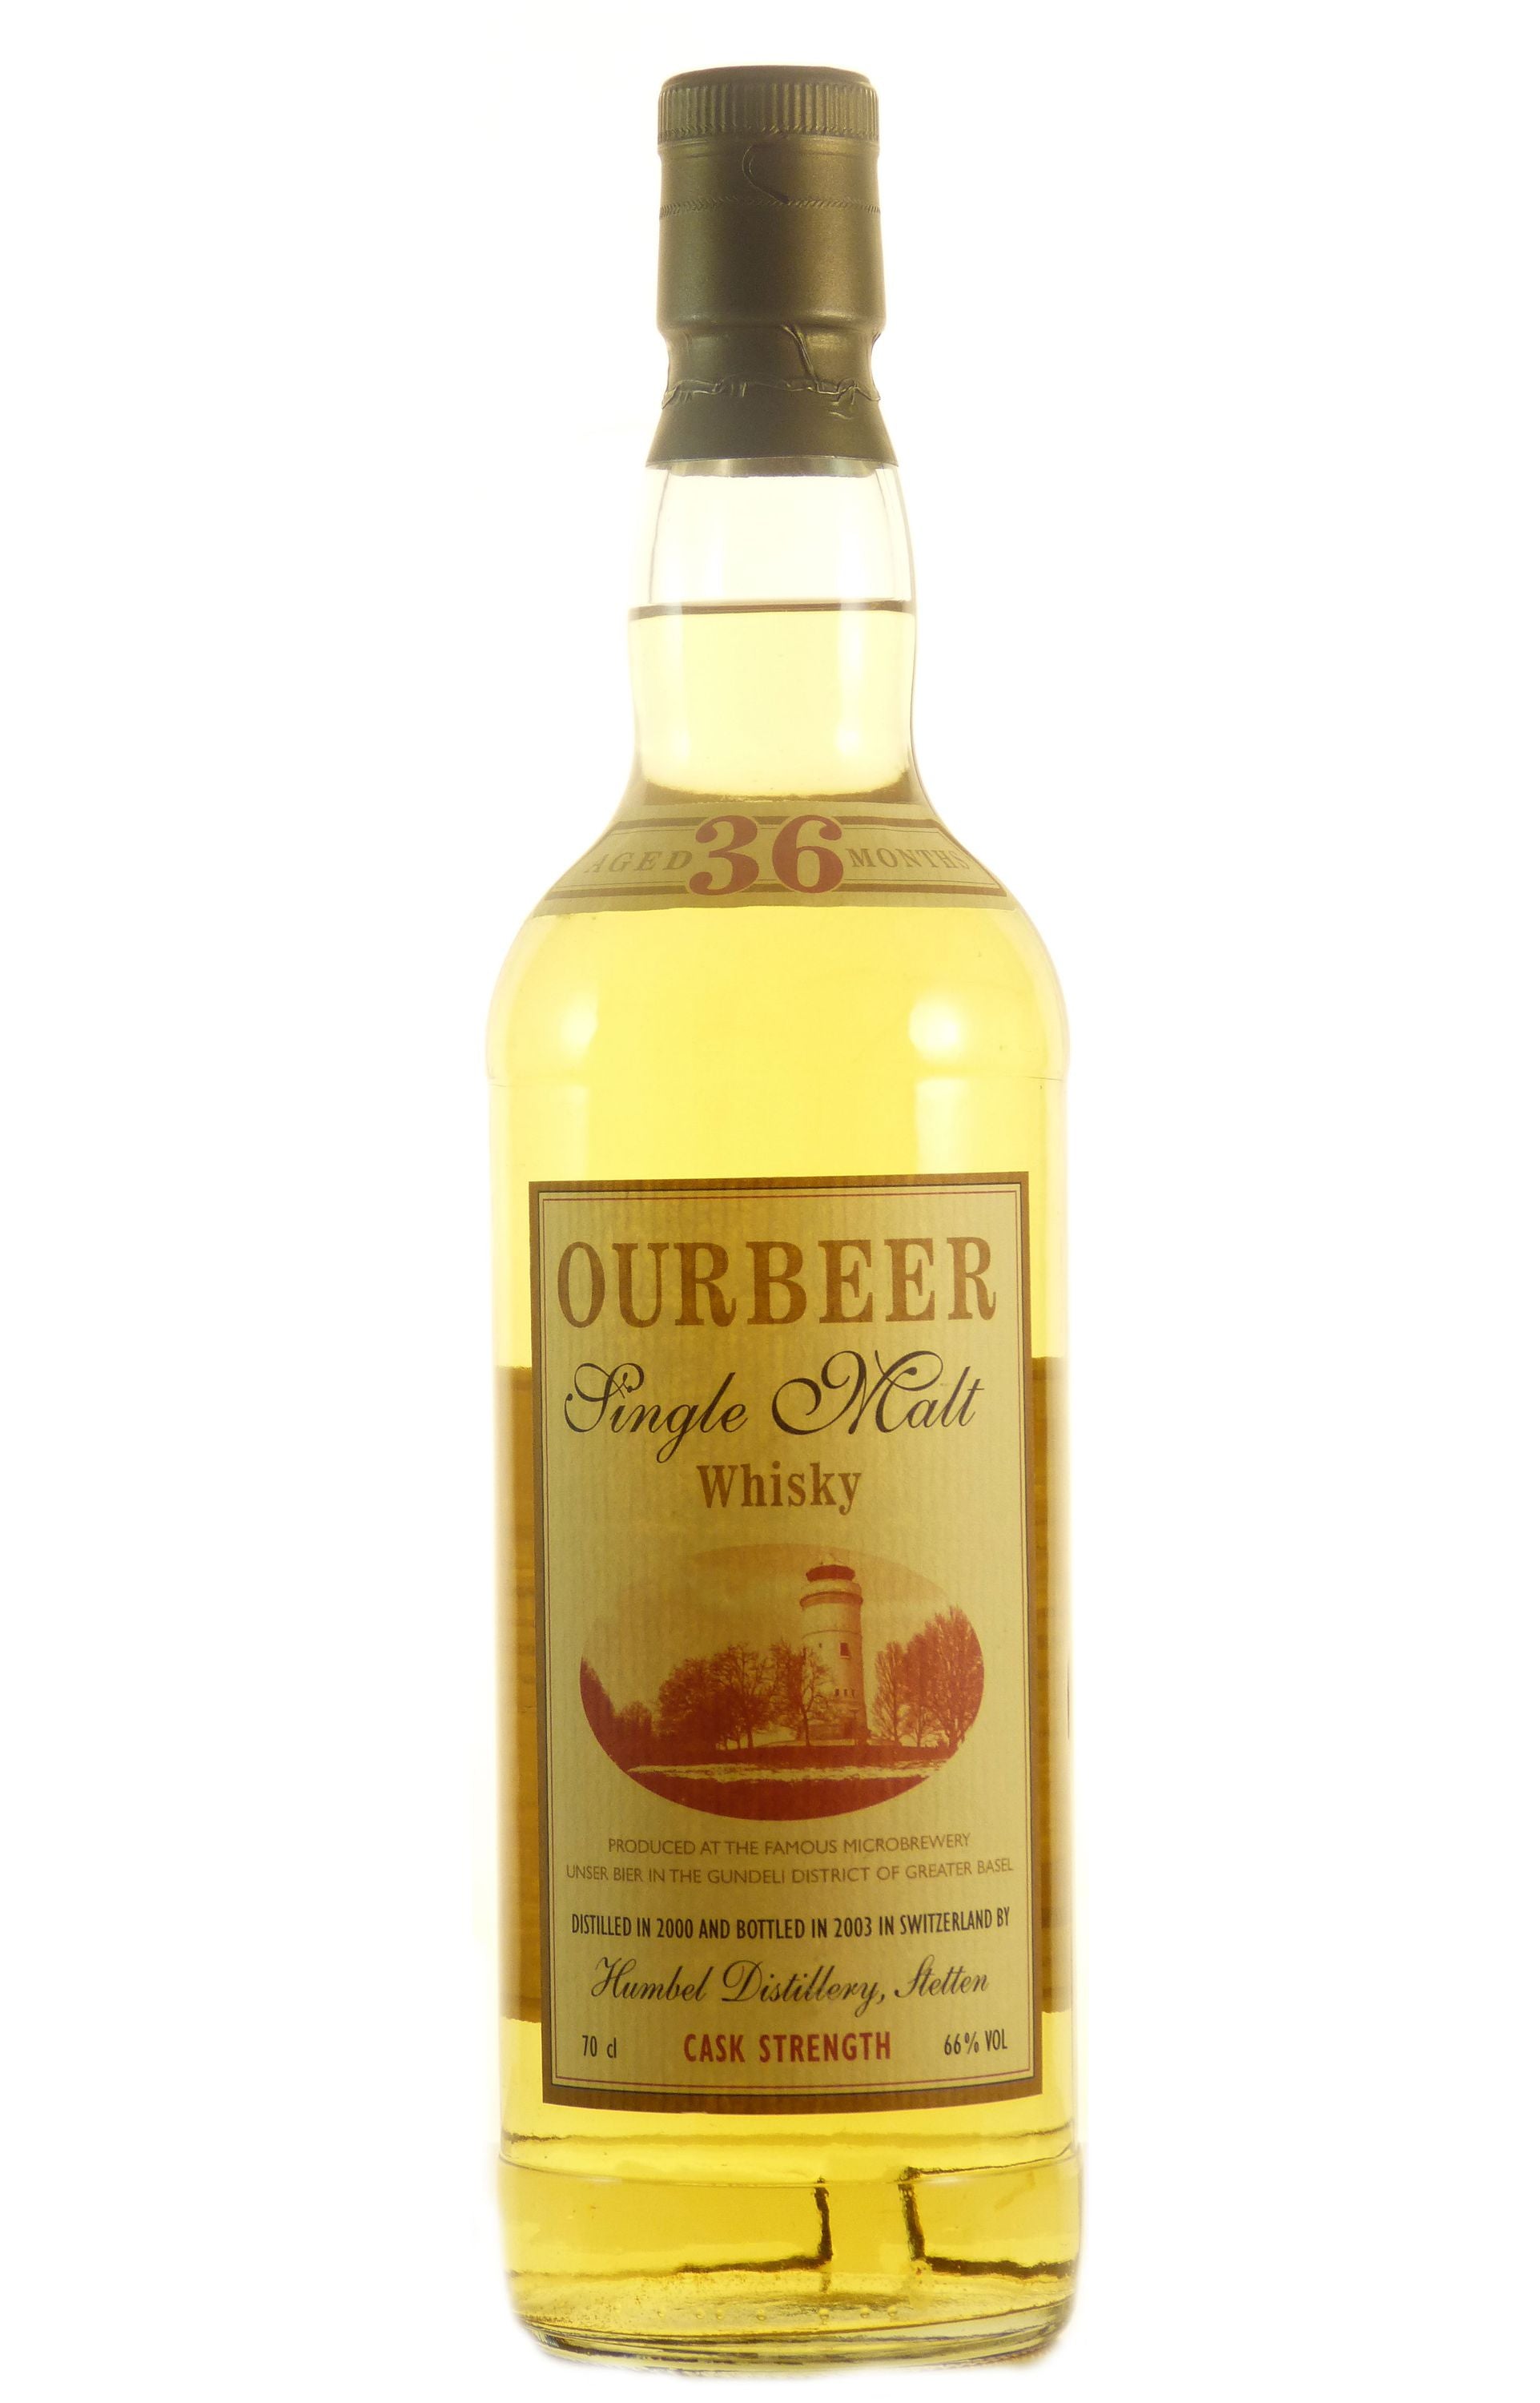 Ourbeer Cask Strength Single Malt Whiskey first bottling, 0.7l, alc. 66% by volume